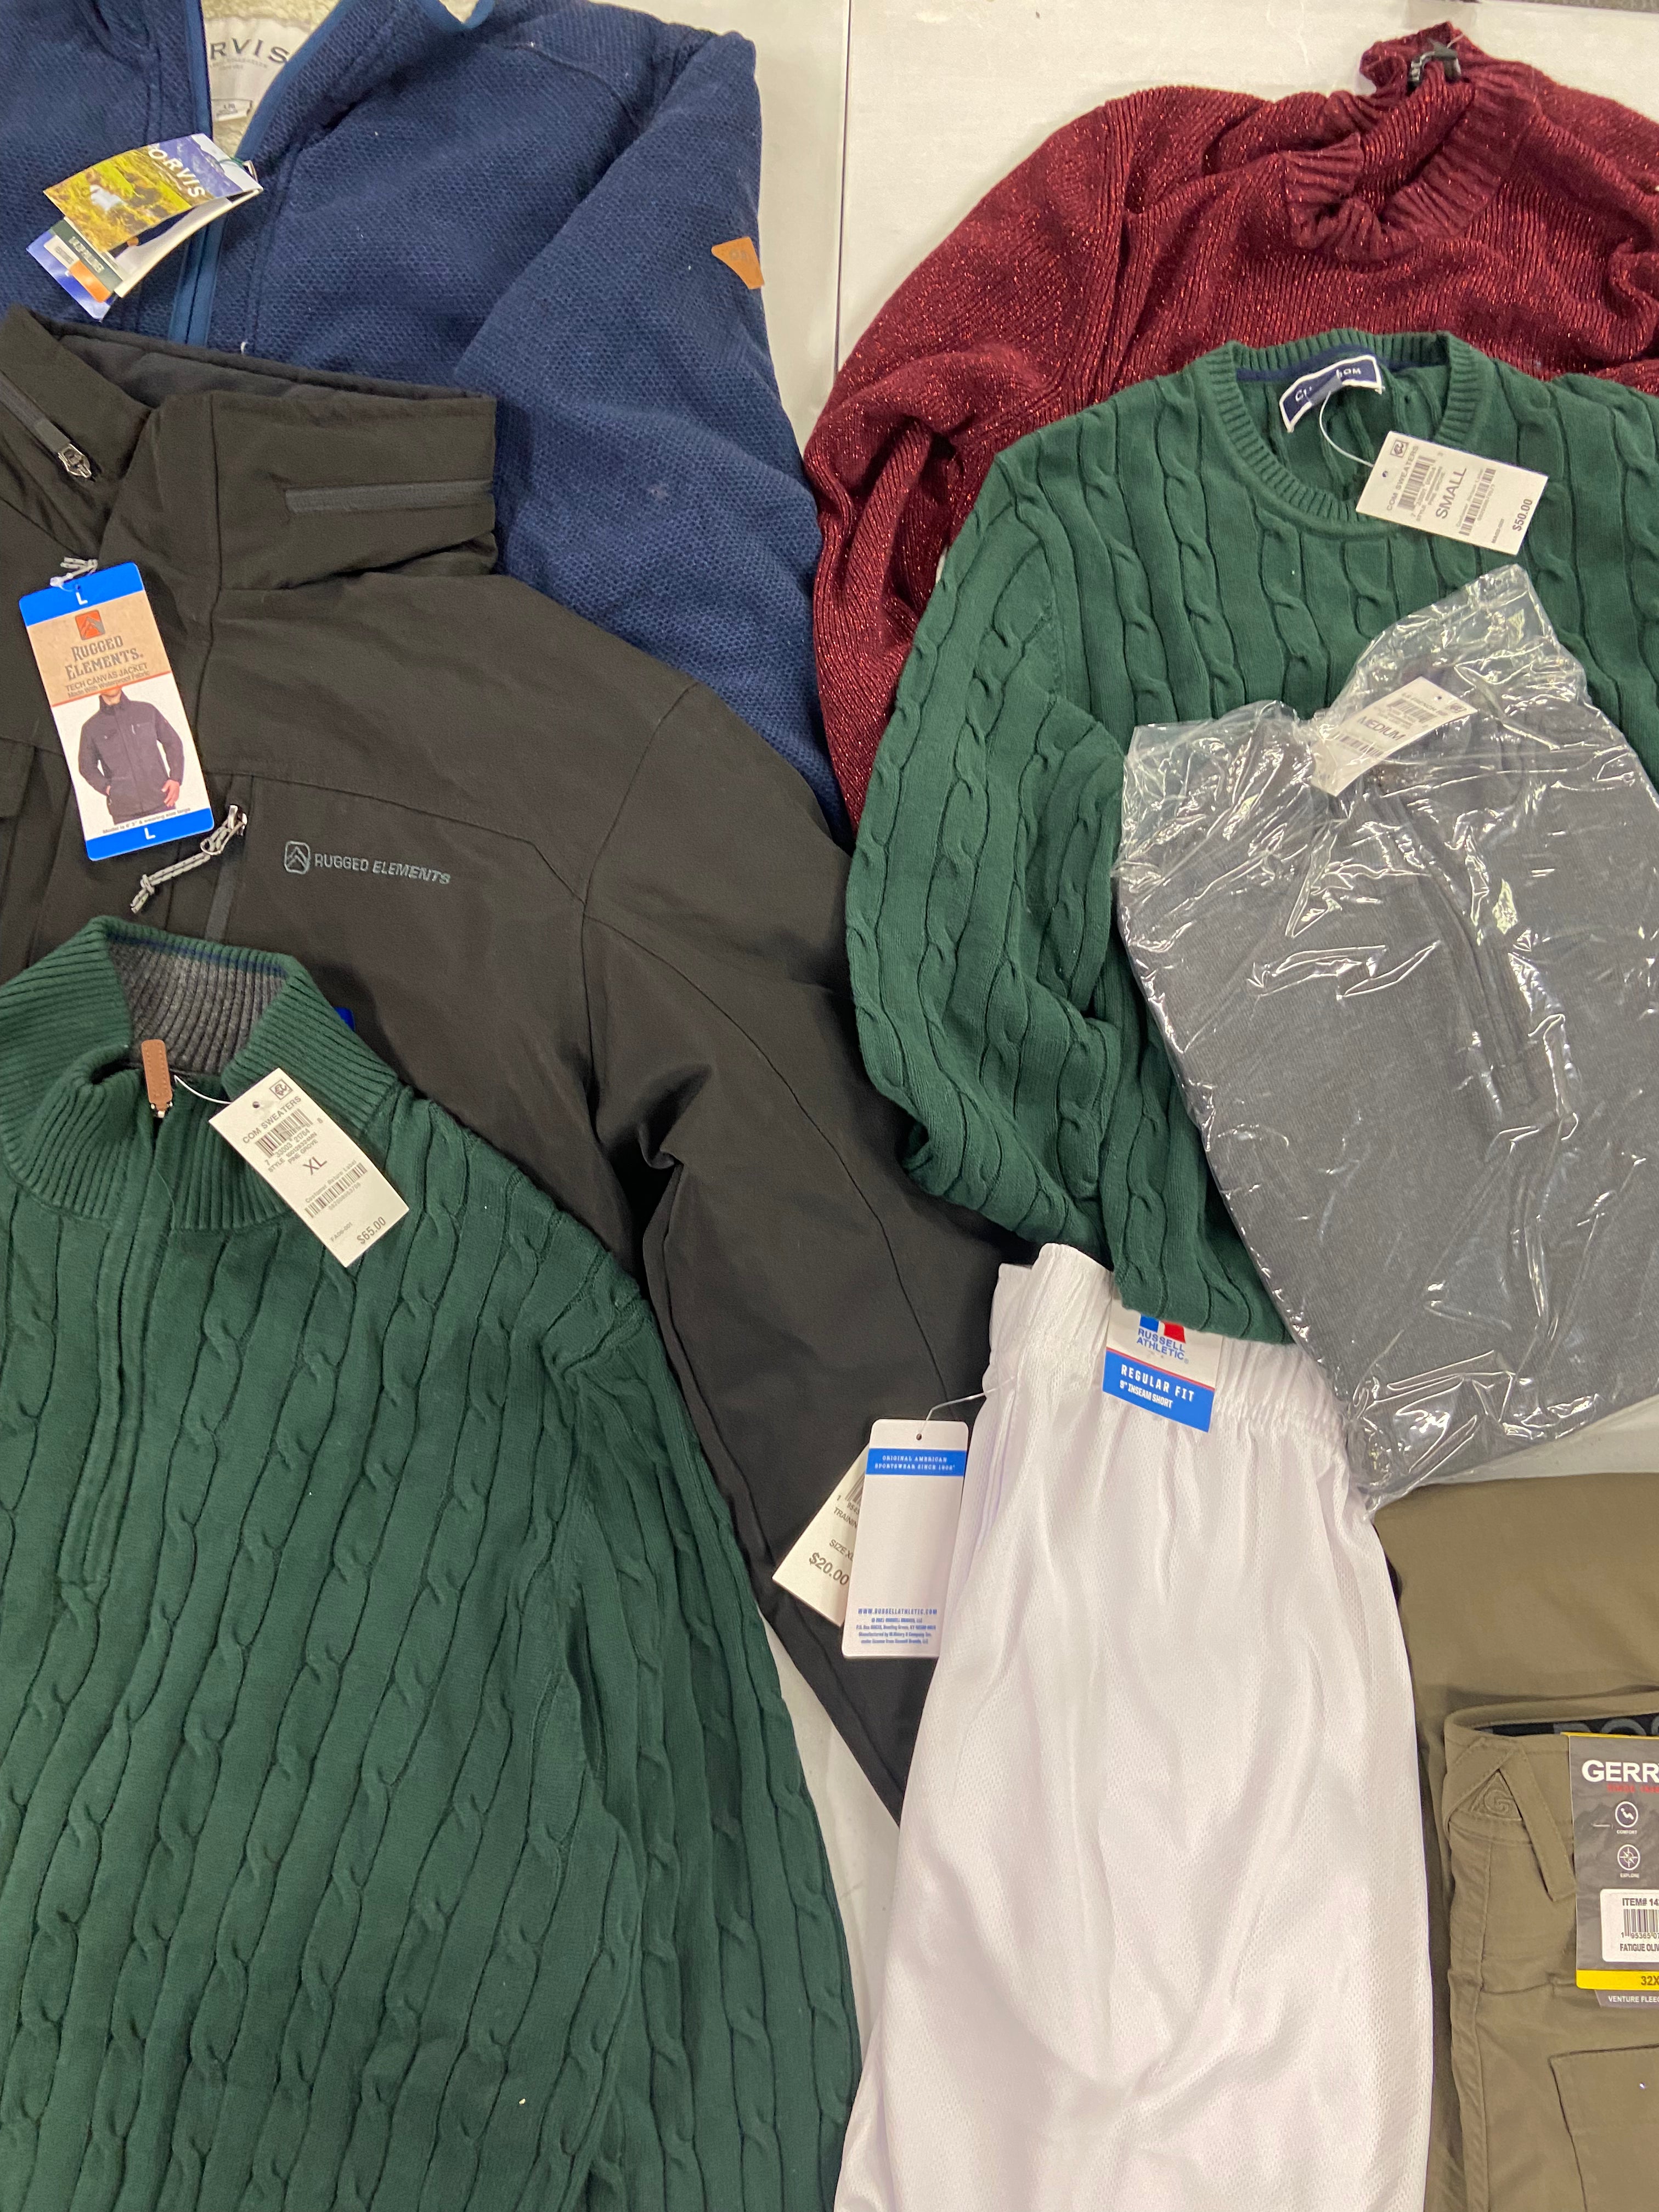 Men's Clothing Sweaters & Others, Wholesale Lot, GERRY, ORVIS